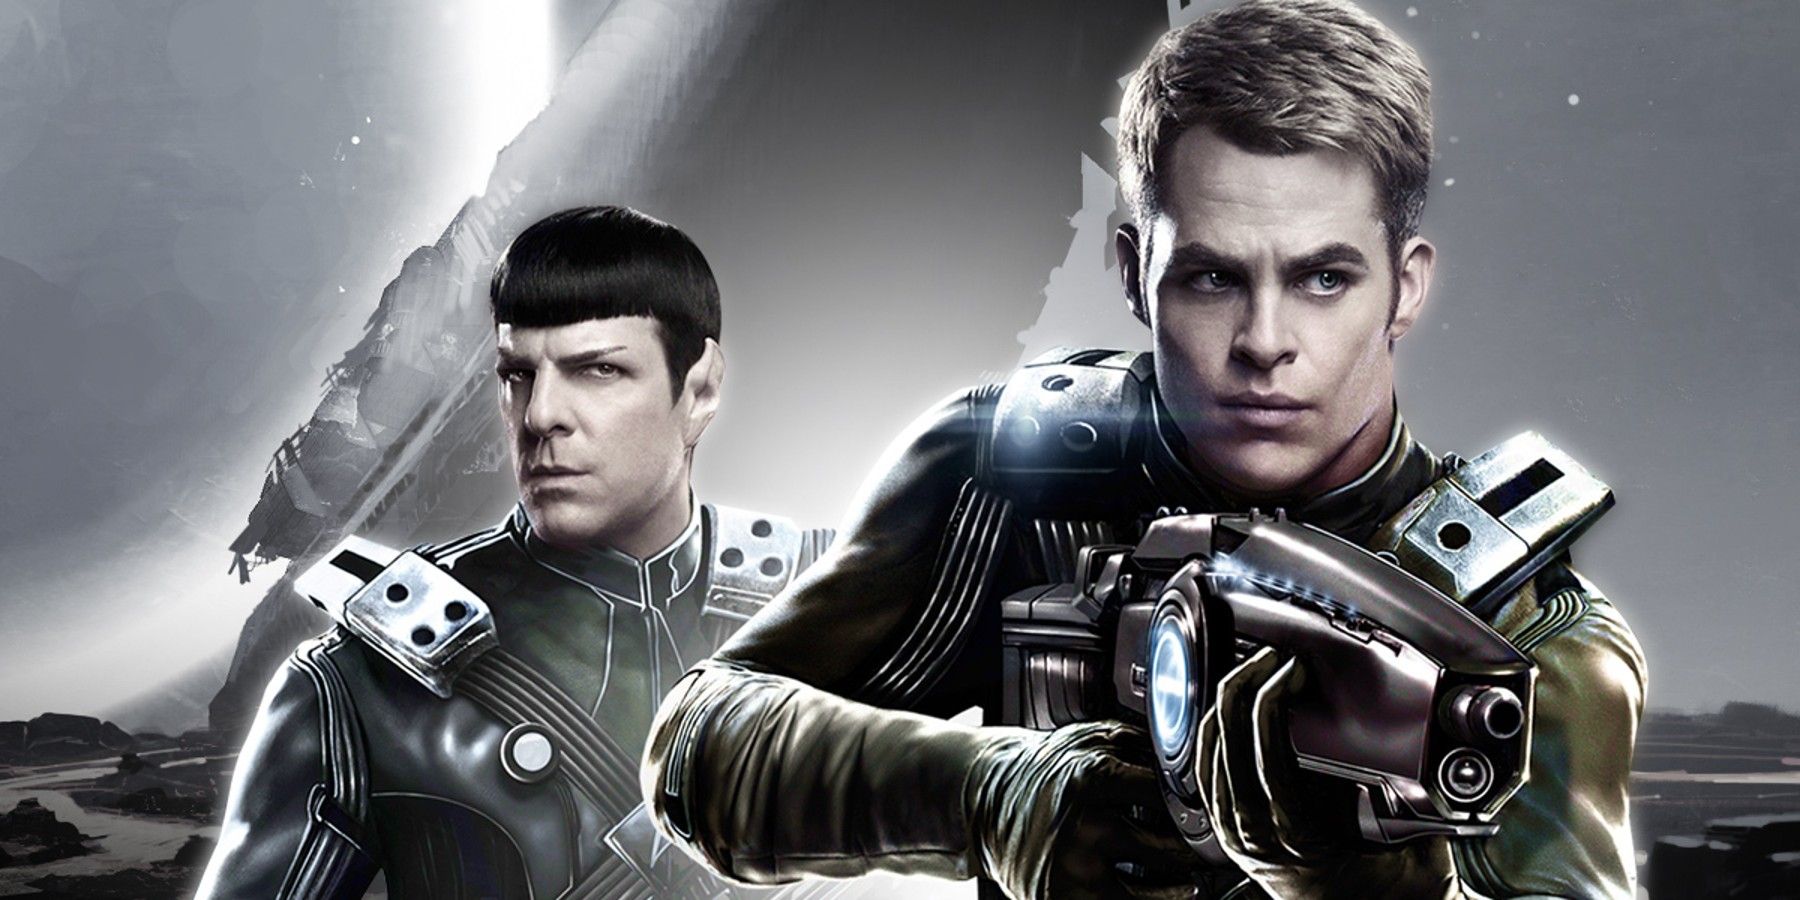 Inconsistent Afdaling residentie A History of Star Trek Video Games